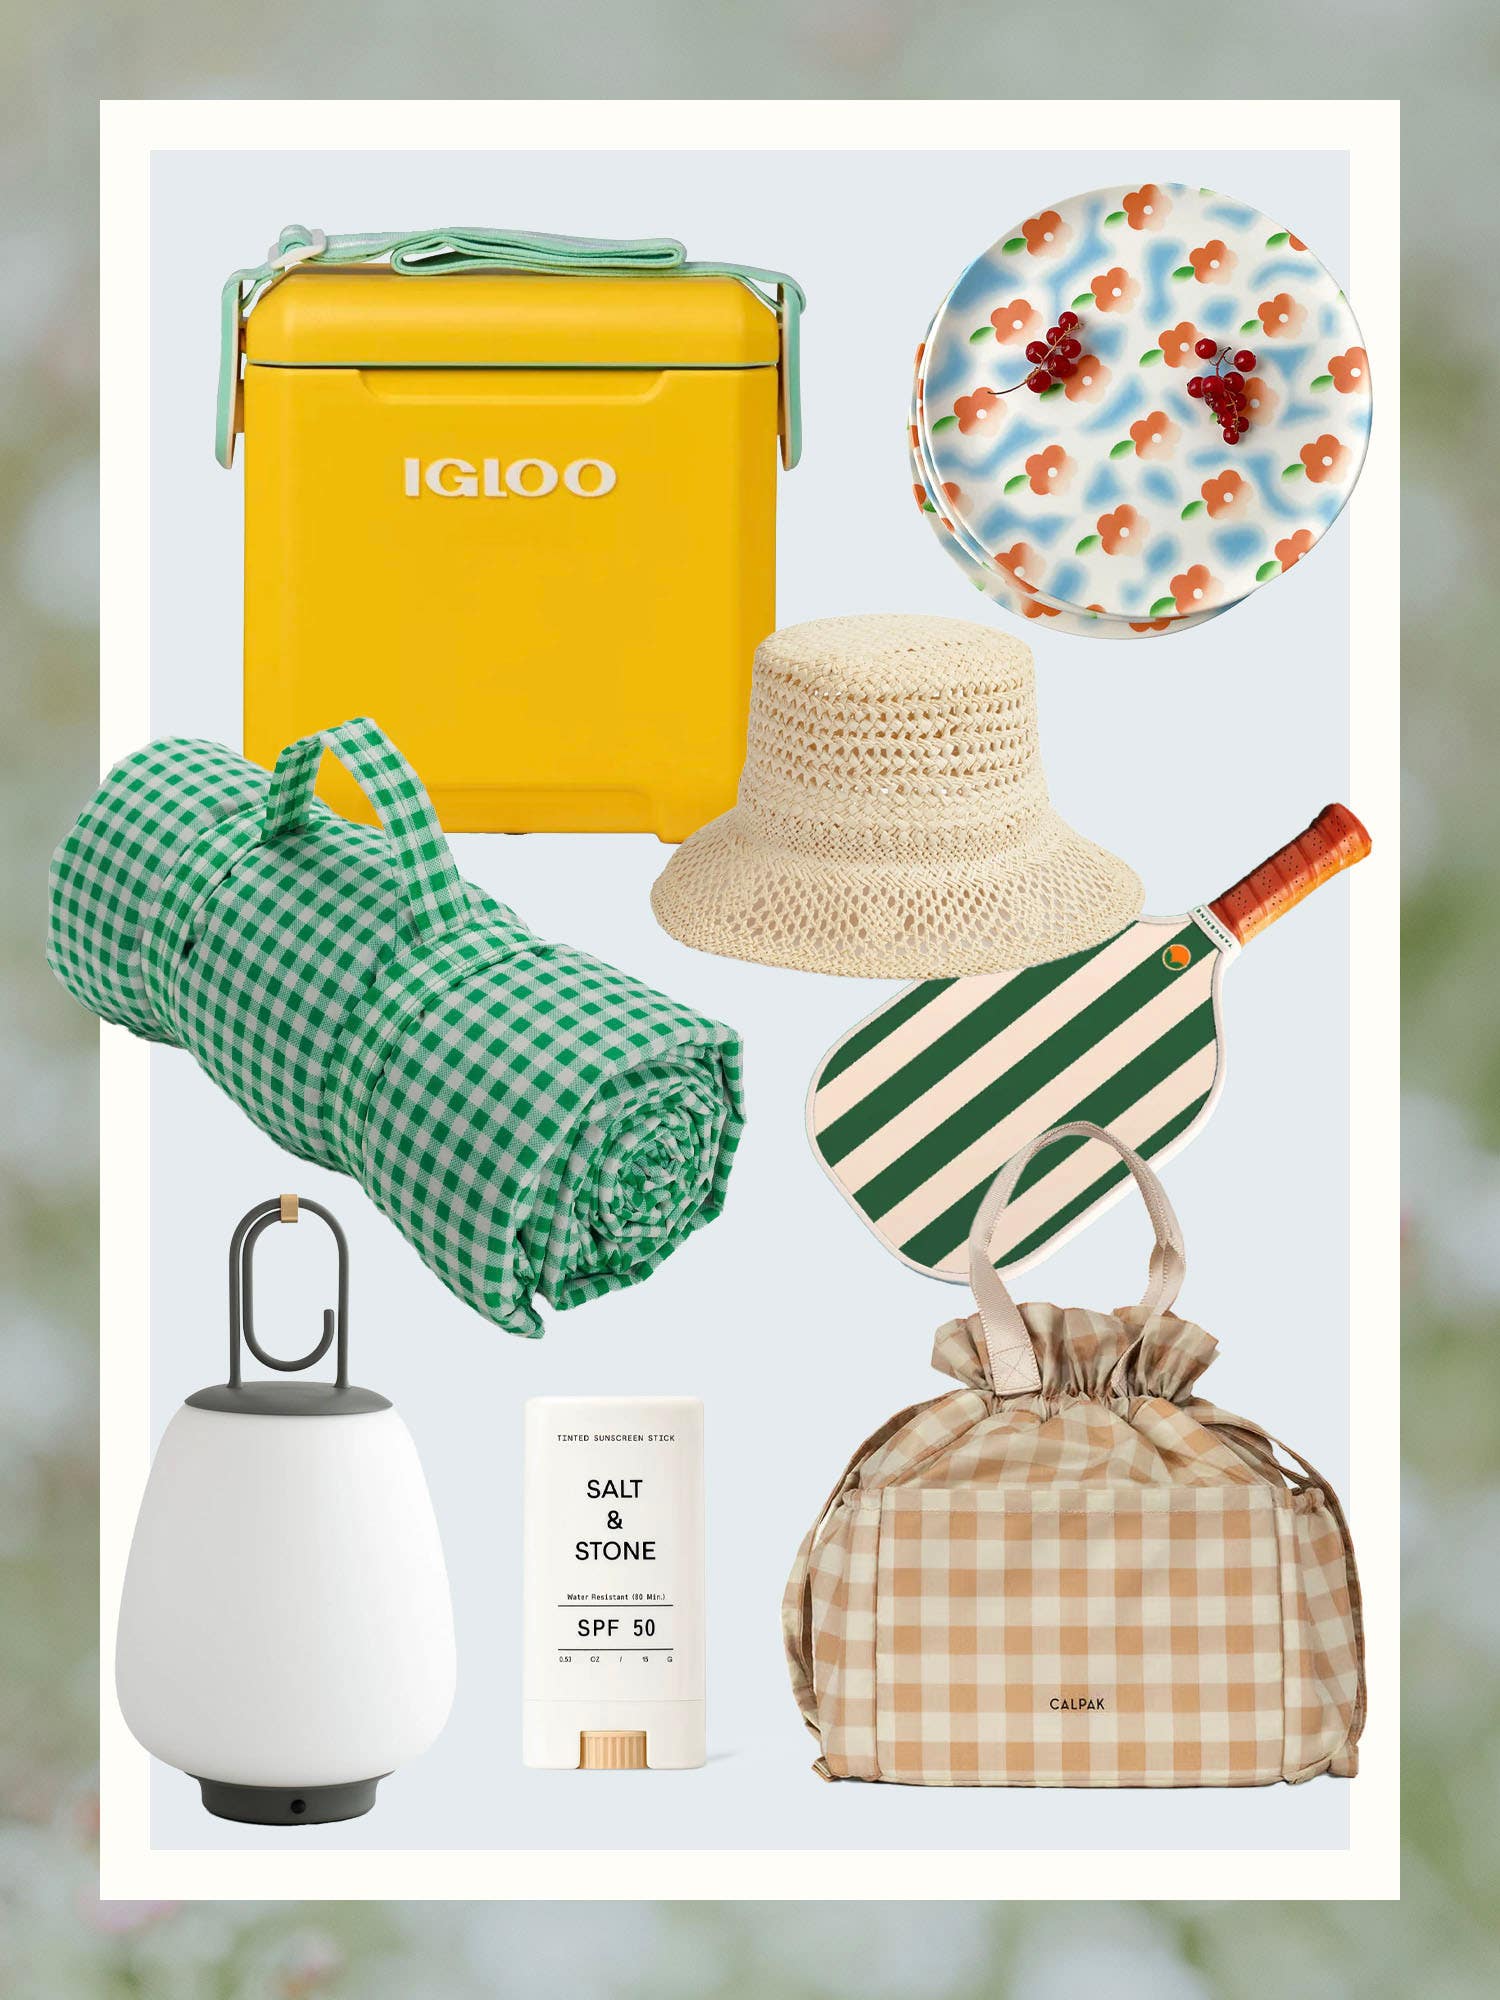 Picnic Season Is Almost Upon Us—Here Are 24 Essentials for Spending Spring Outside